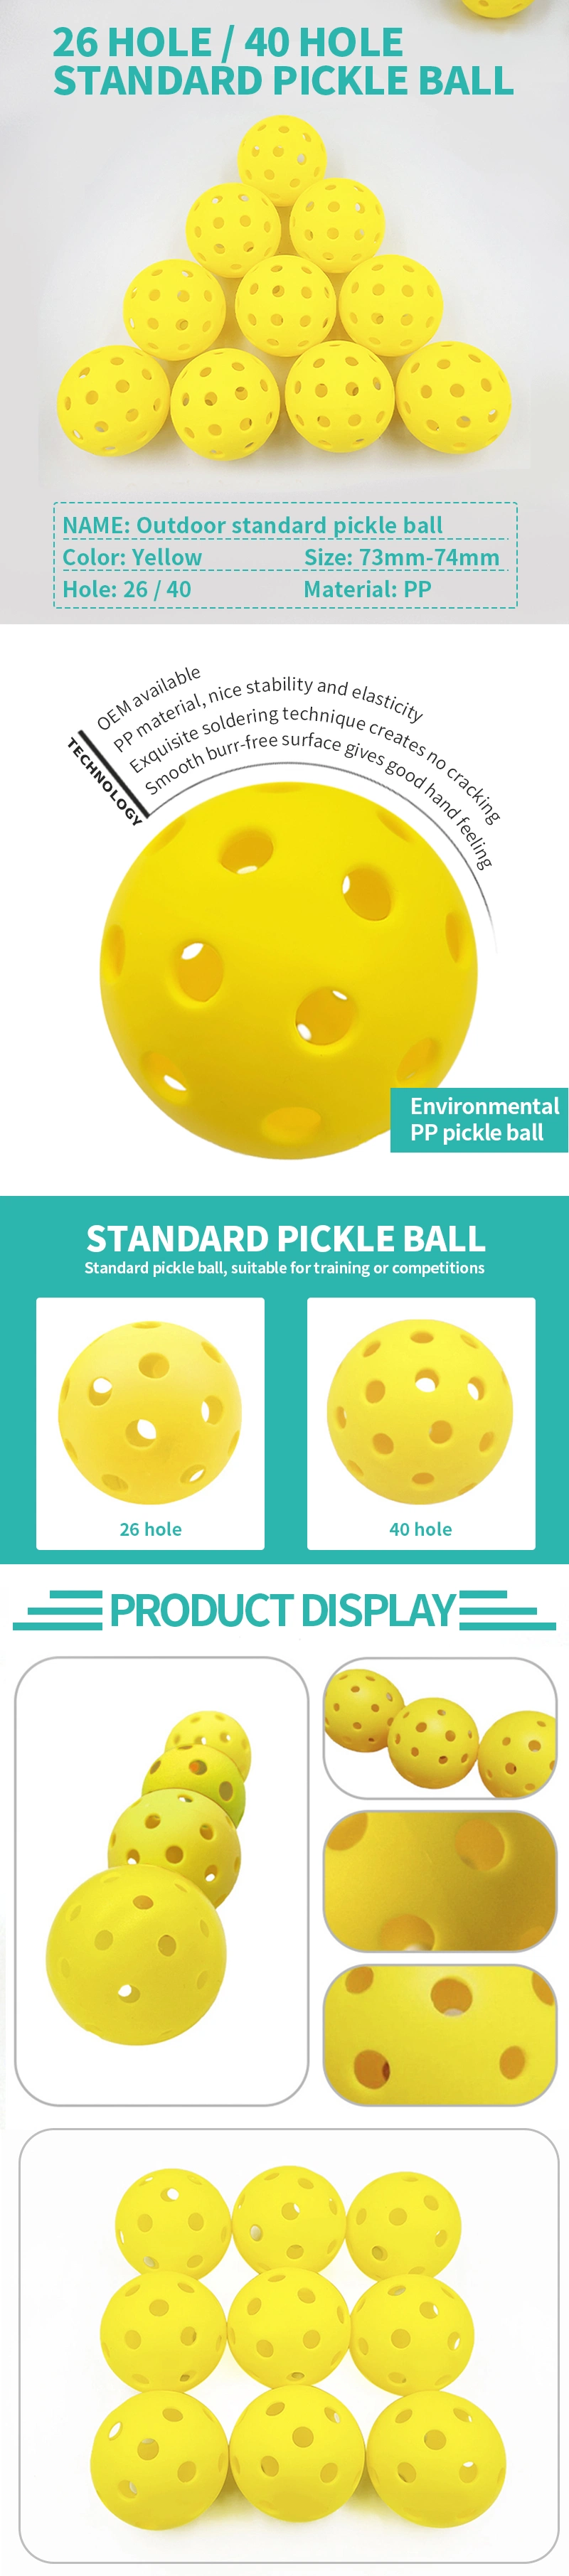 Factory Wholesale Pickleball 40 Hole Practice Balls Customization Accepted